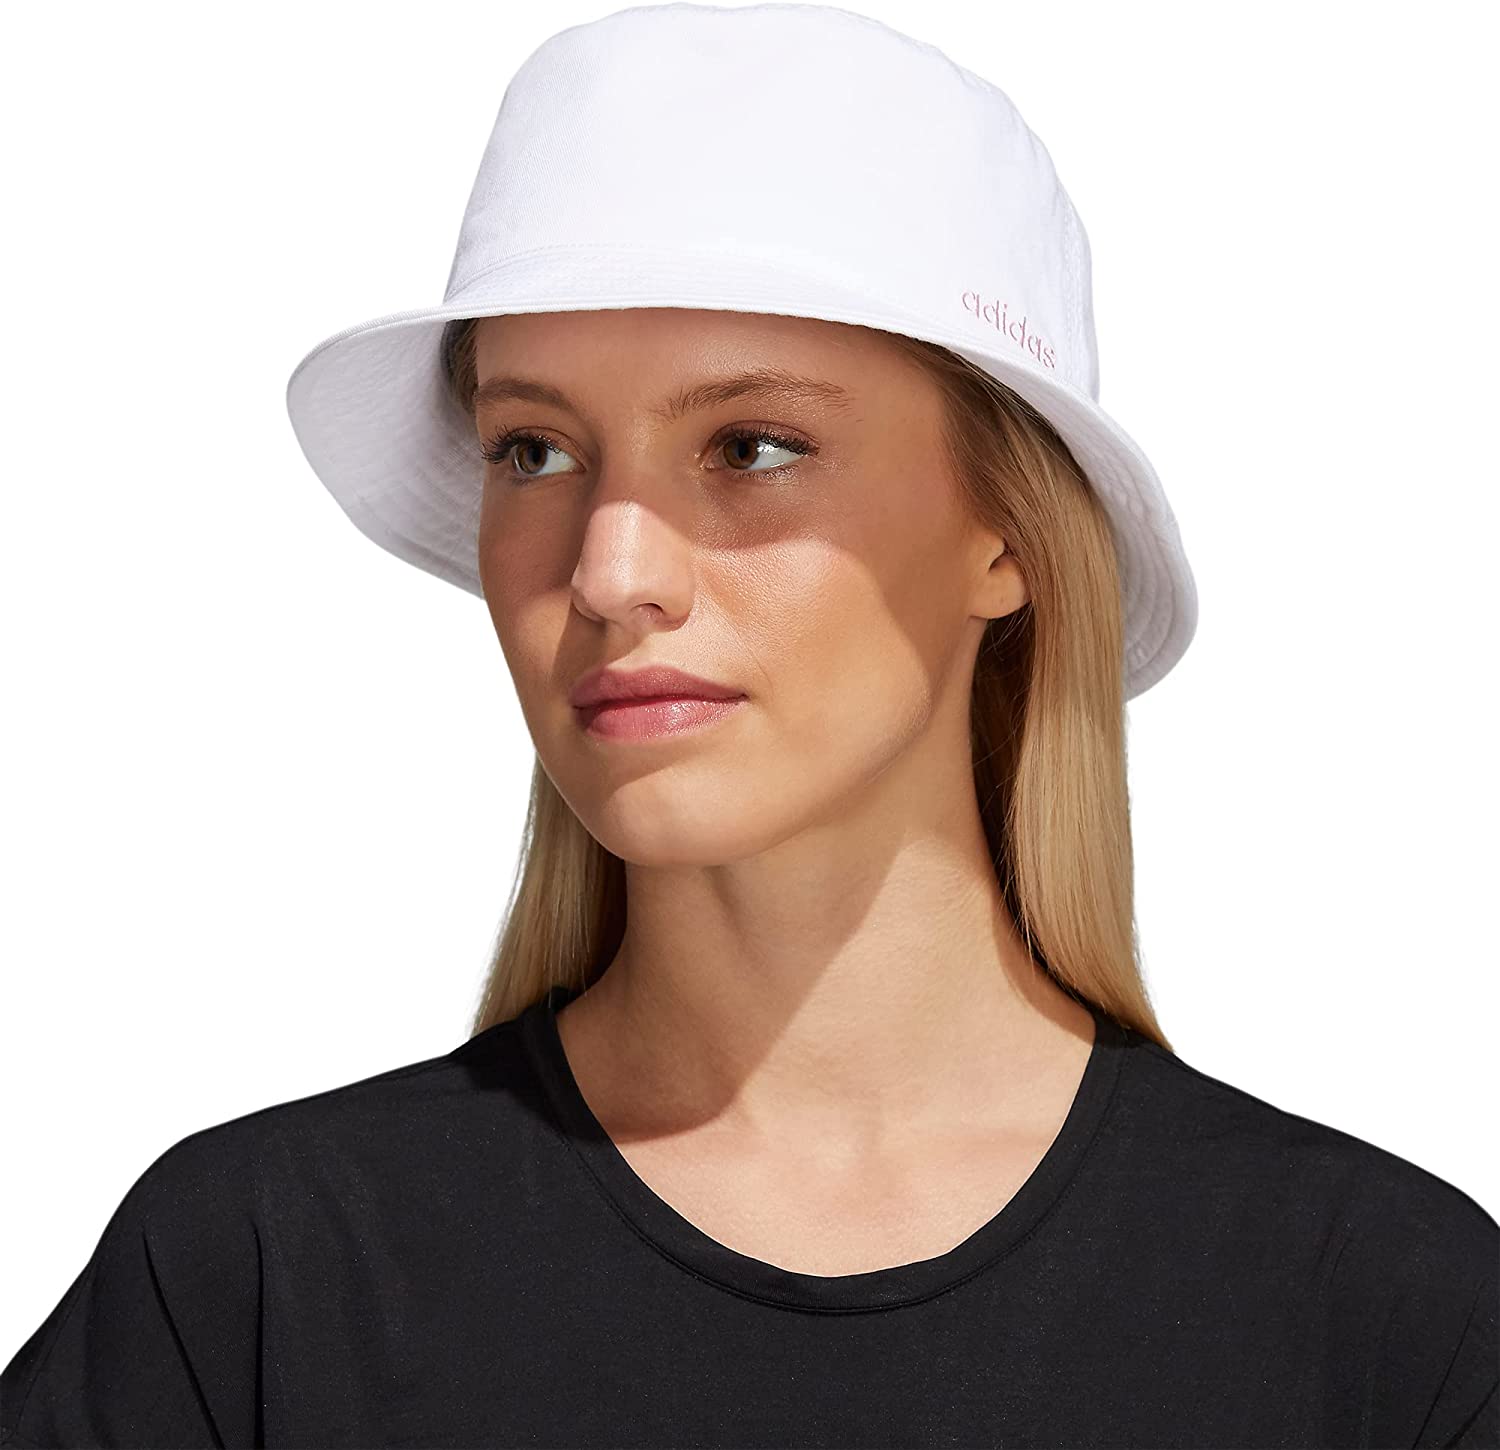 adidas Women's Core Essentials Bucket Hat (Black or White) $7.80 + Free Shipping w/ Prime or on $25+